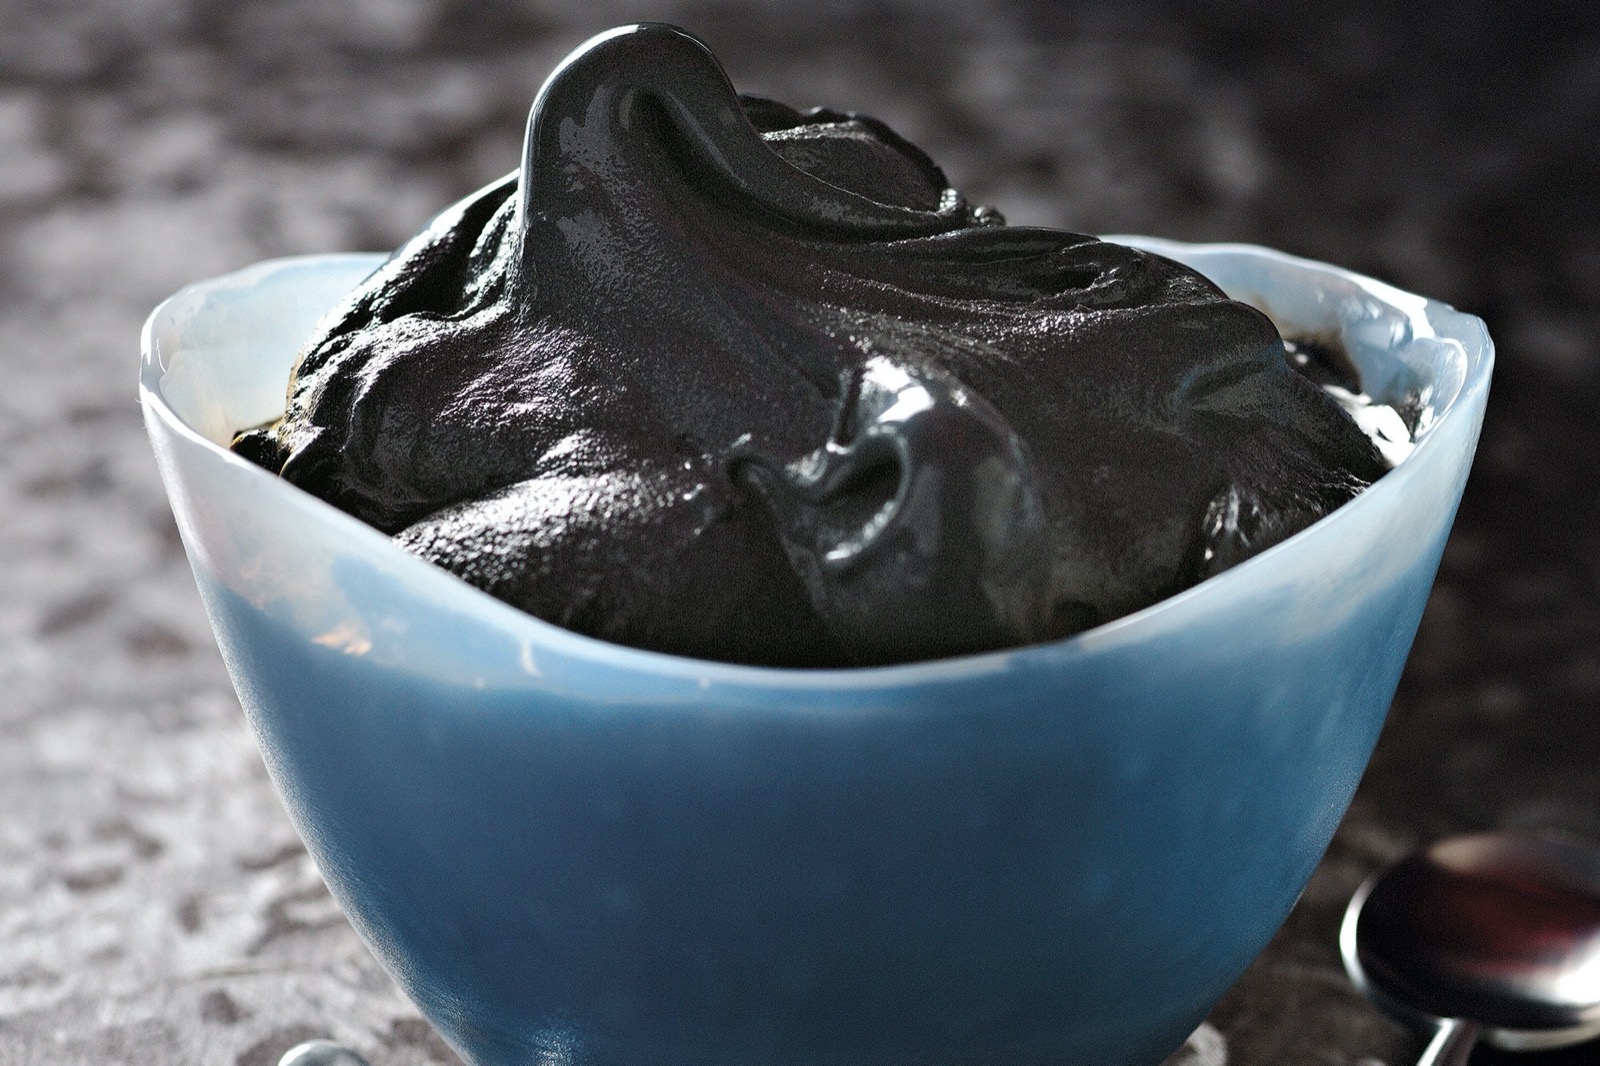 🍦 It’s Time to Vote “Yay” Or “Nay” On These Unusual Ice Cream Flavors Black Licorice Ice Cream